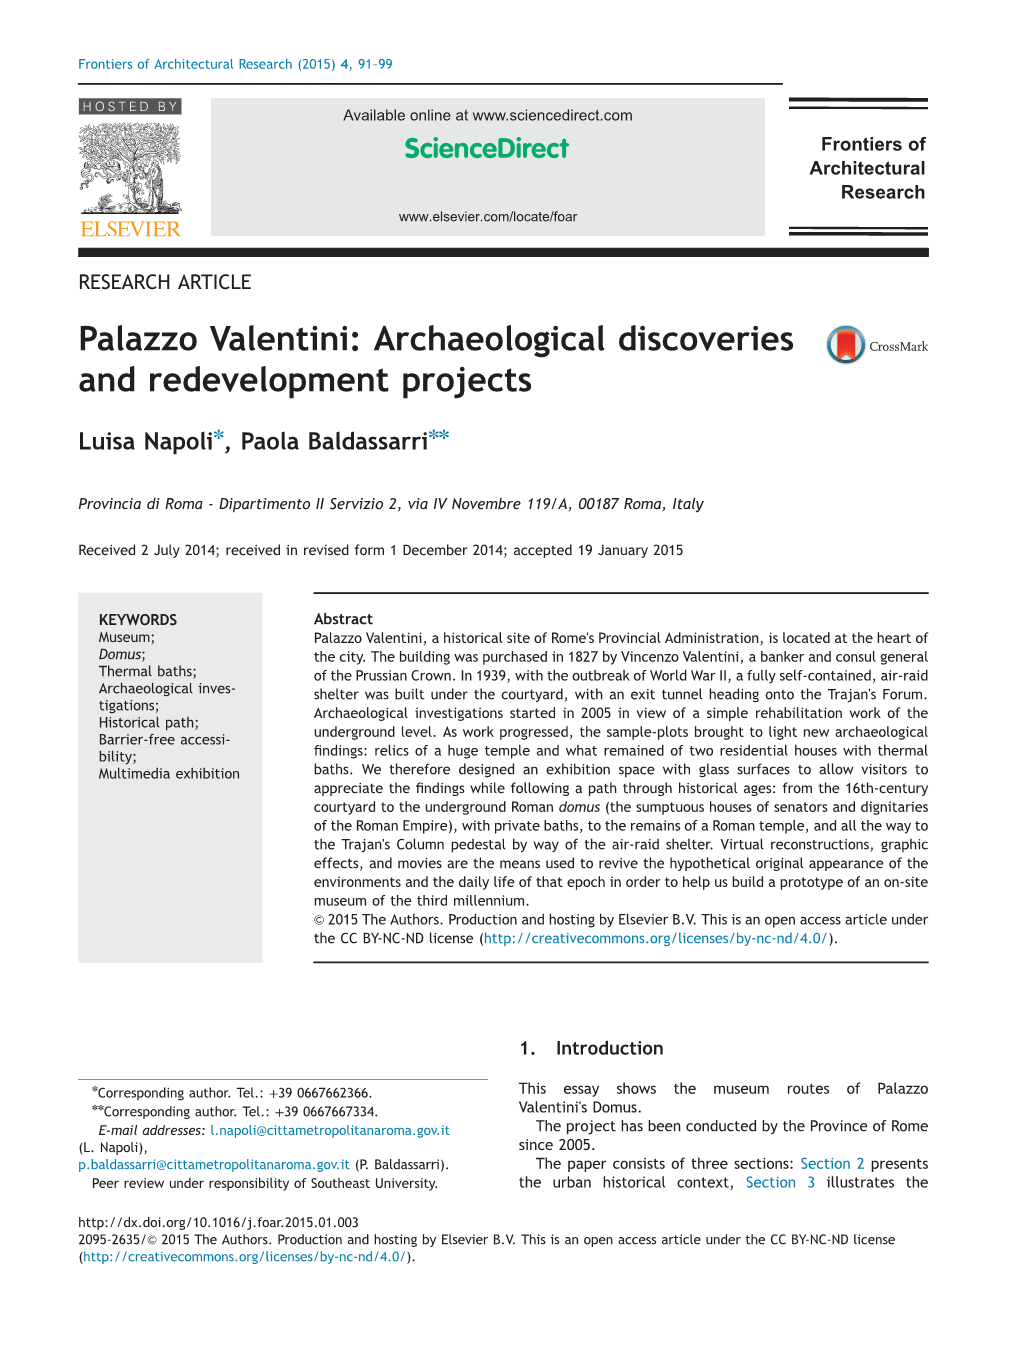 Palazzo Valentini Archaeological Discoveries and Redevelopment